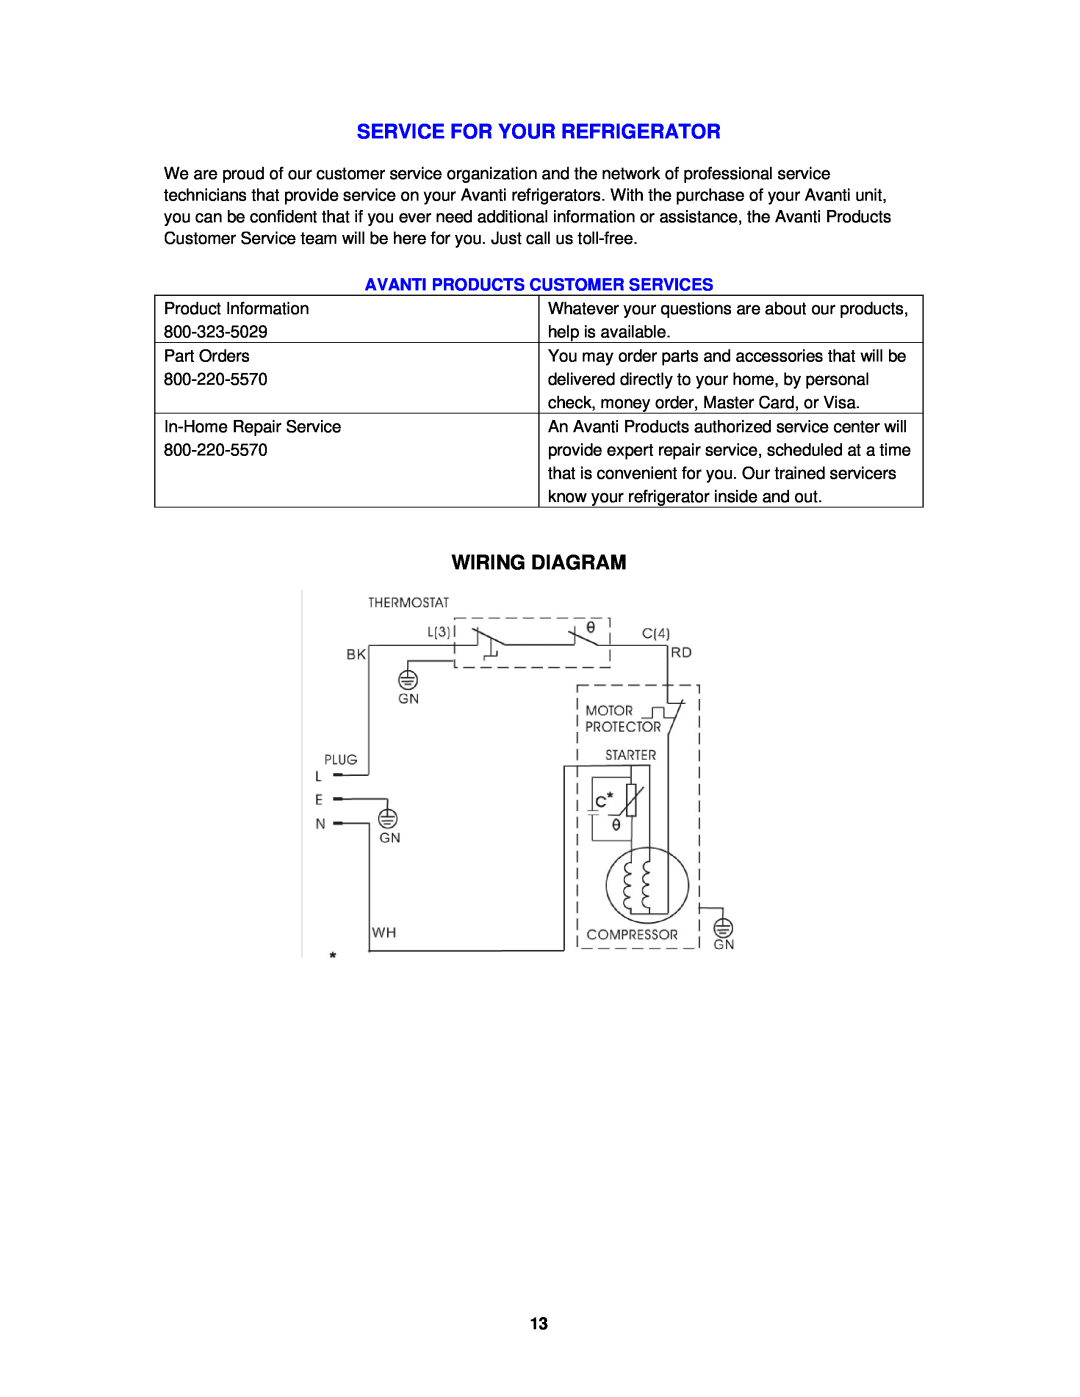 Avanti VFR14PS-IS instruction manual Service For Your Refrigerator, Wiring Diagram 